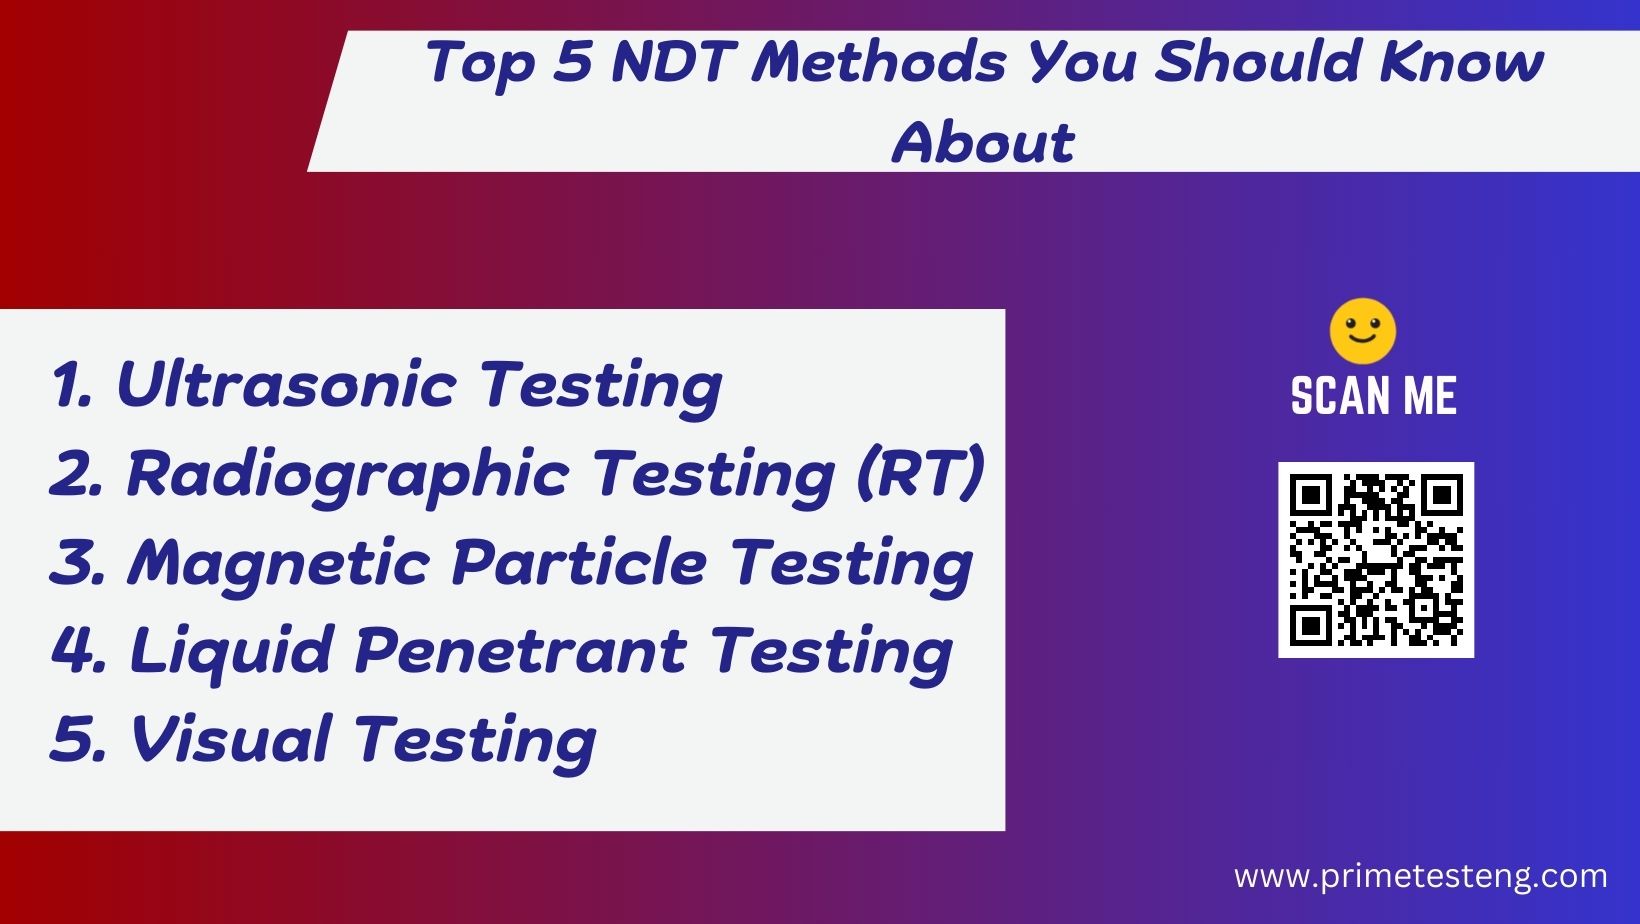 Top 5 NDT Methods You Should Know About